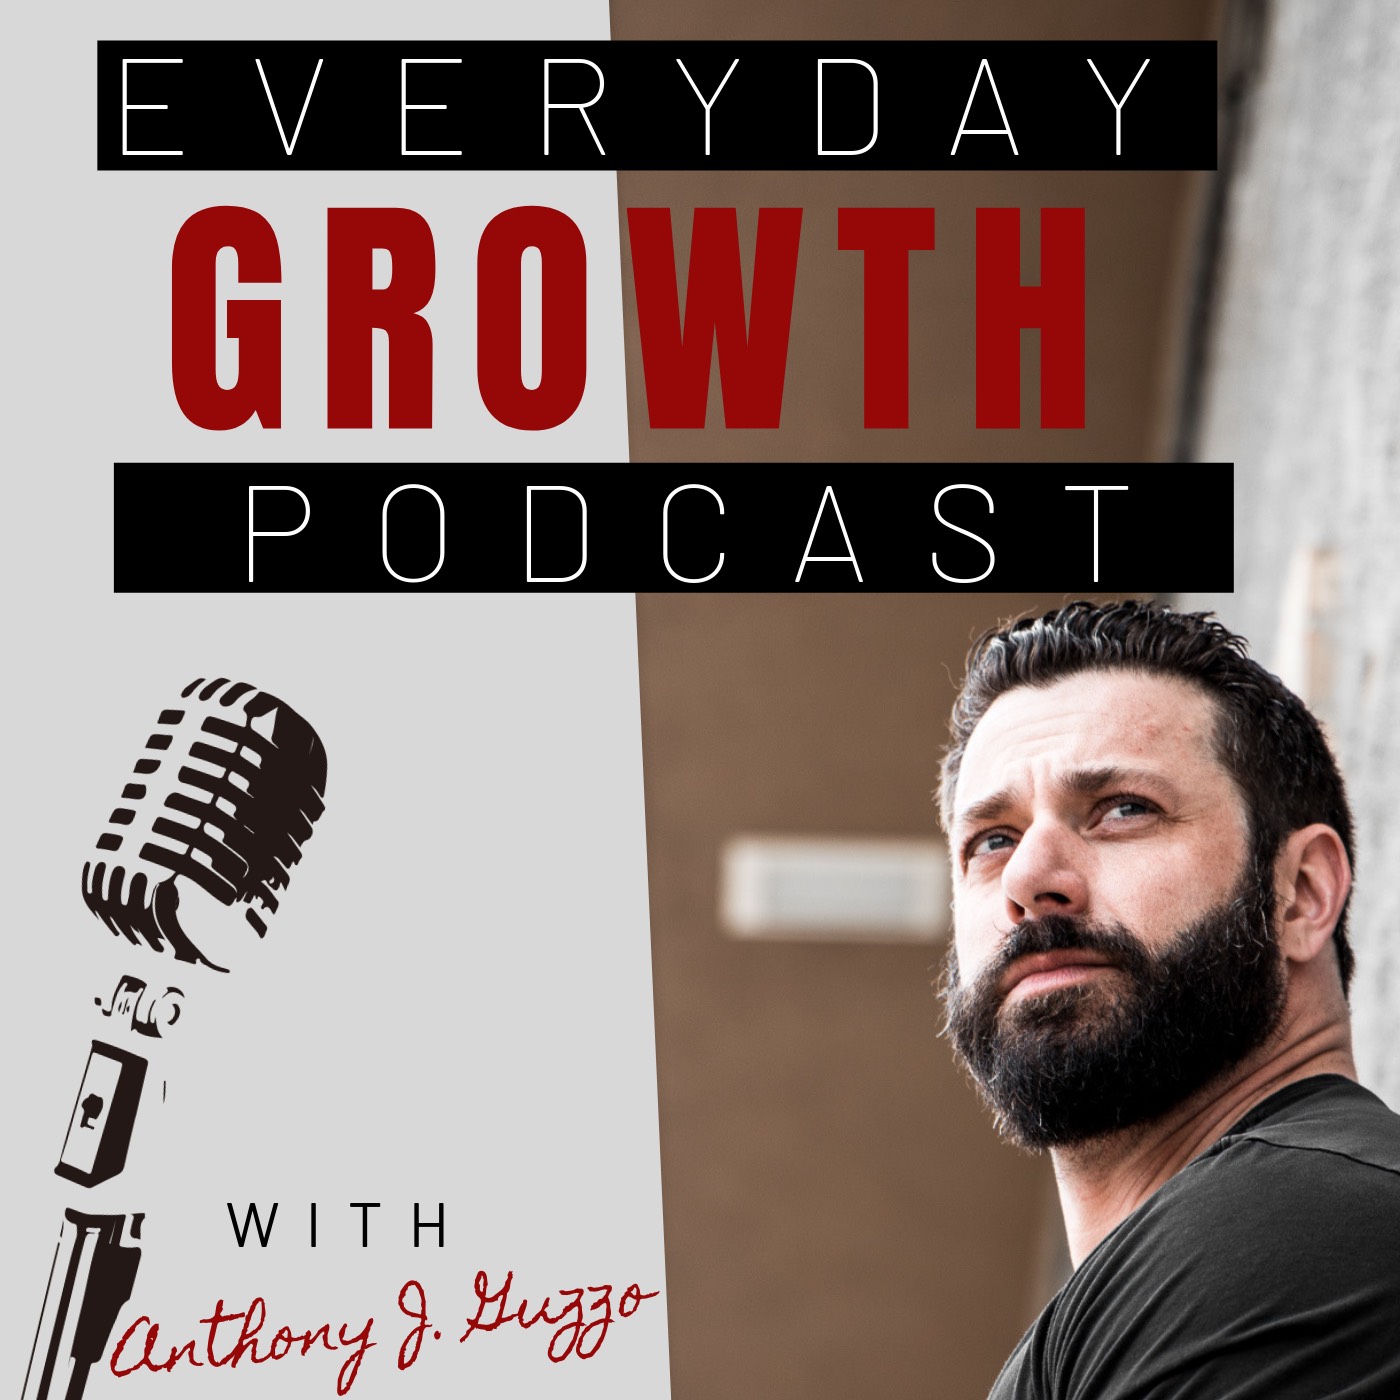 The Everyday Growth Podcast